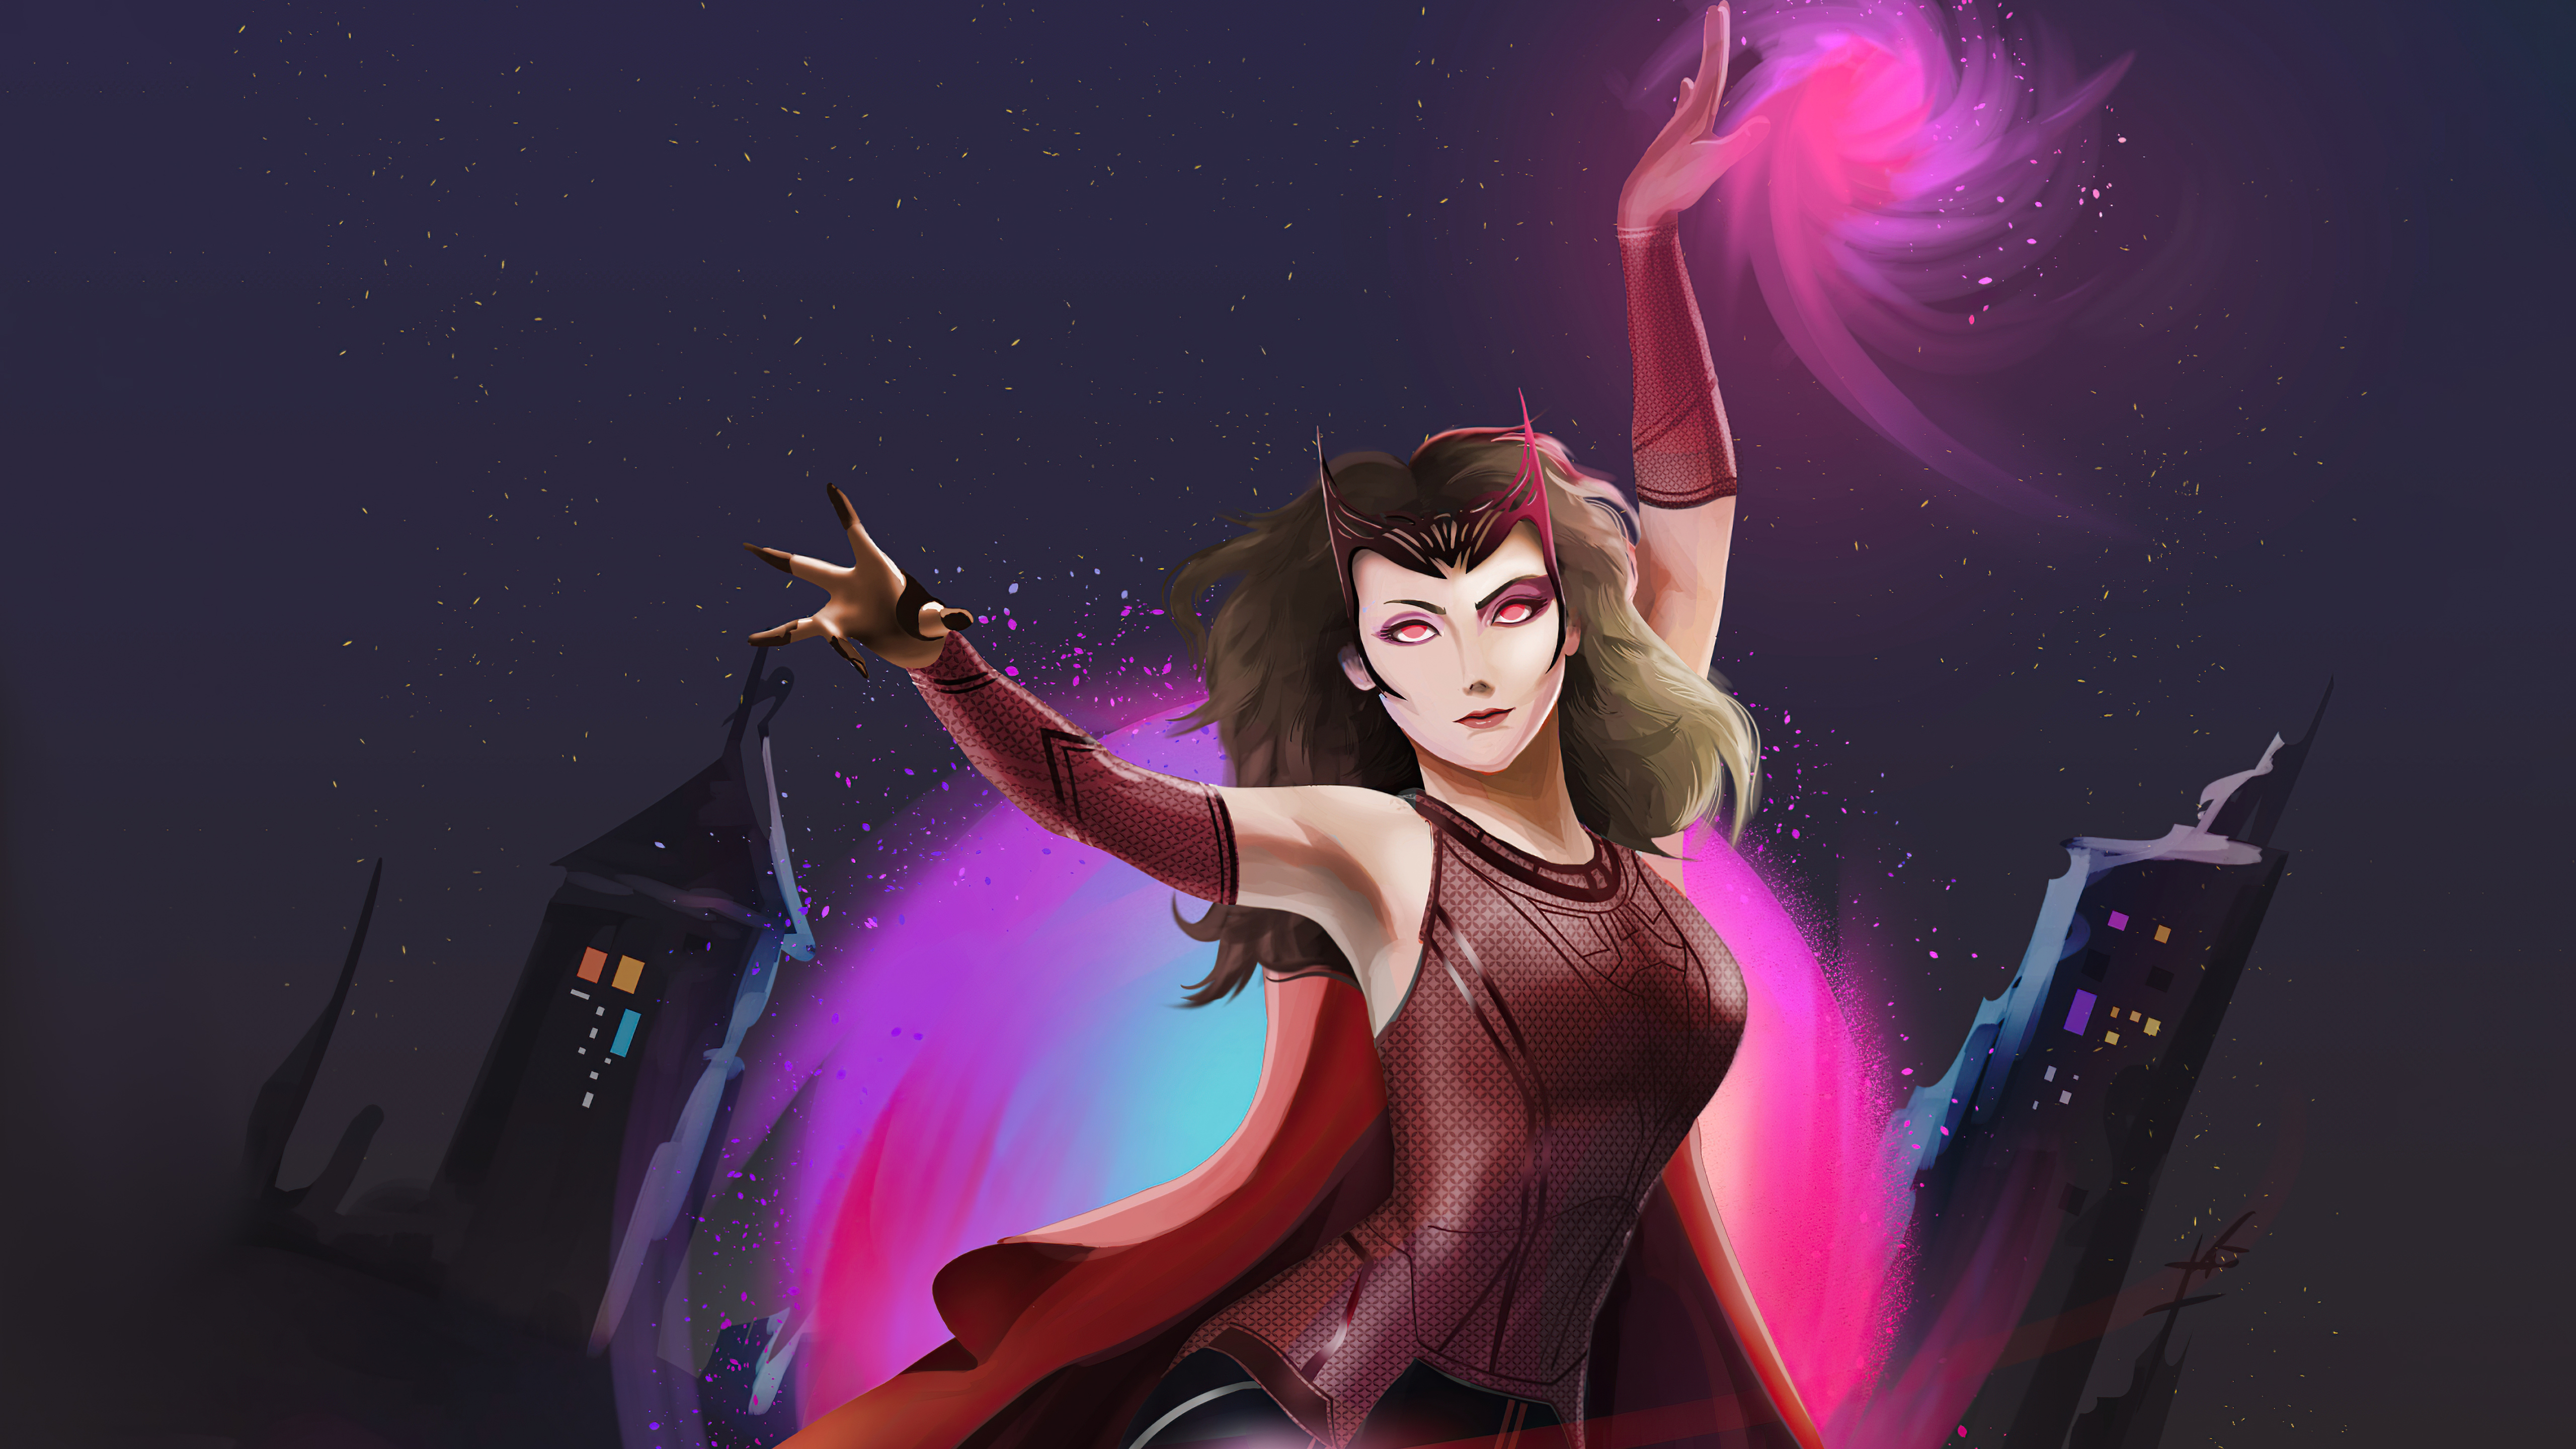 Scarlet Witch Wallpapers  Top 35 Best Scarlet Witch Backgrounds Download